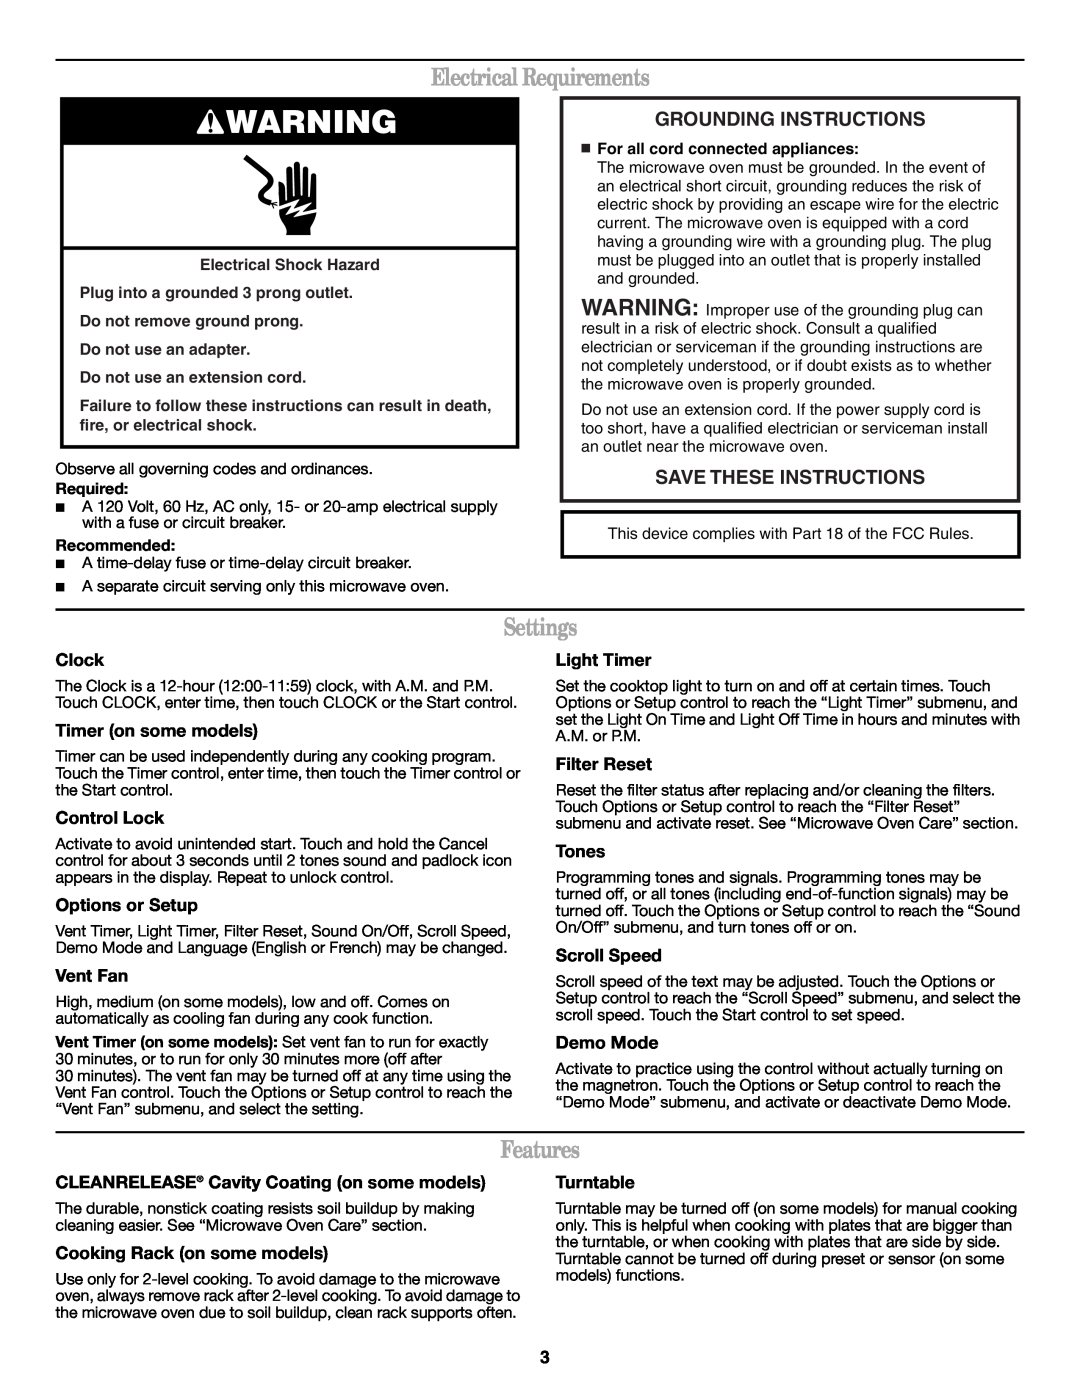 Whirlpool W10182518A manual Electrical Requirements, Settings, Features, Grounding Instructions, Save These Instructions 